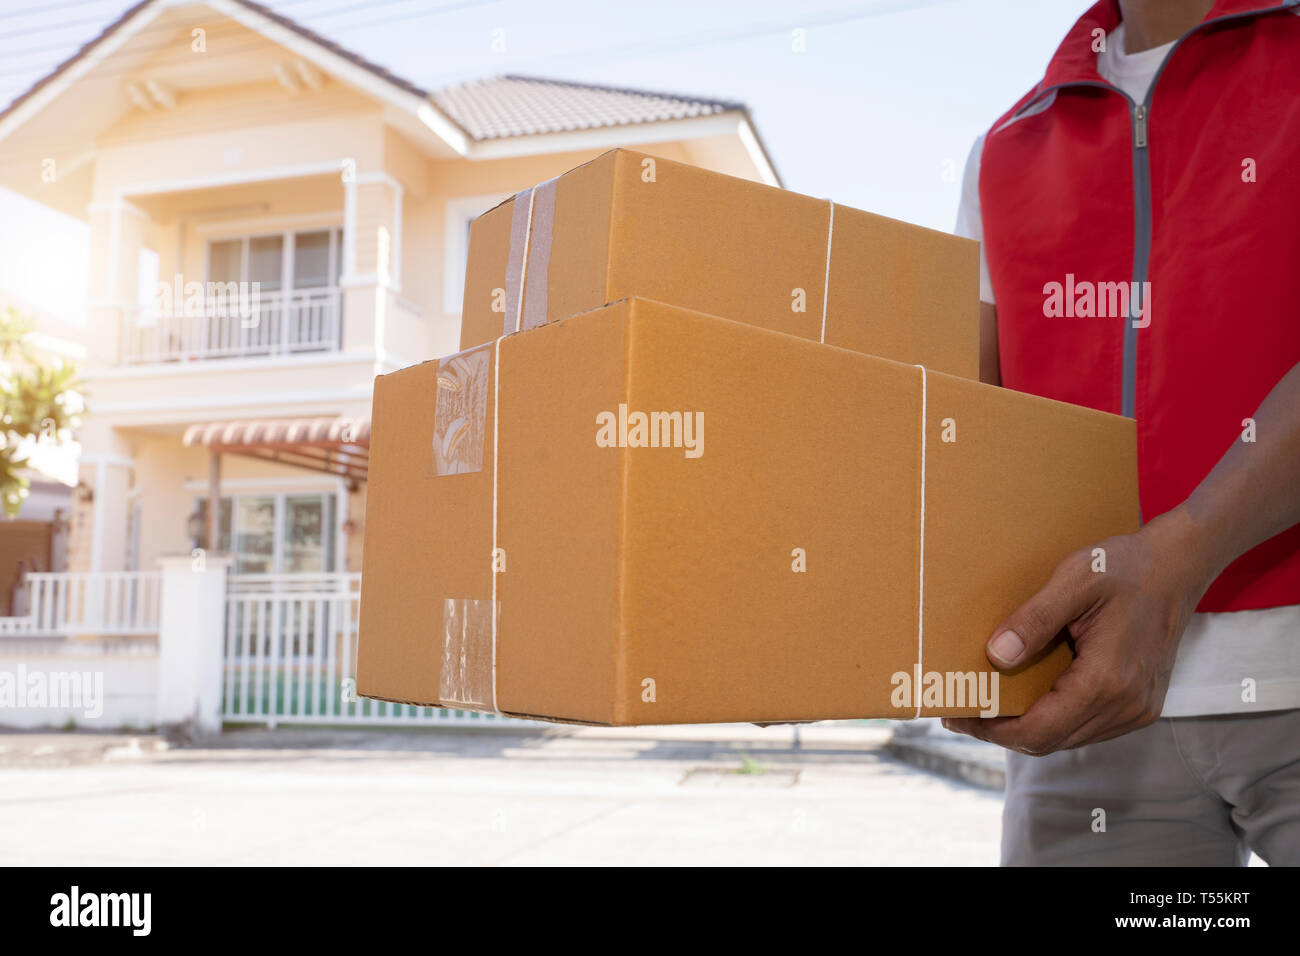 Delivery man in red uniform handing parcel boxes to recipient - courier service concept - Image Stock Photo